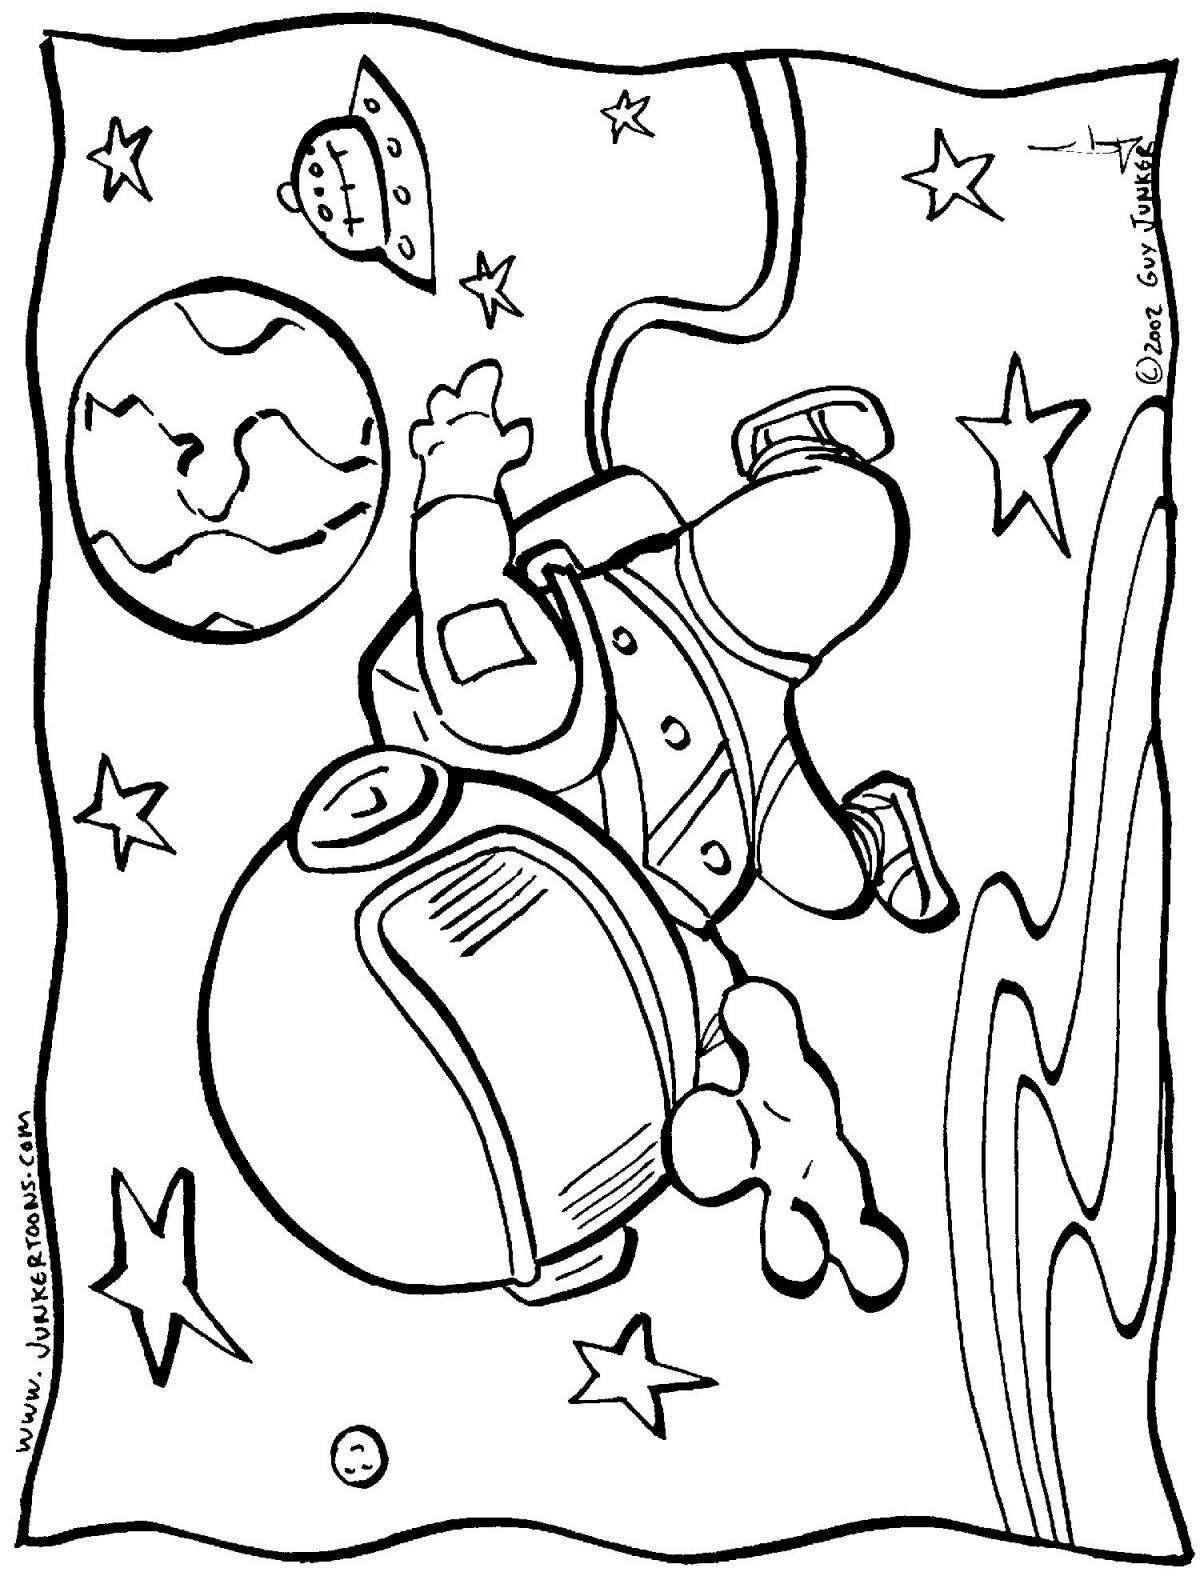 Dynamic astronaut with space telescope coloring book